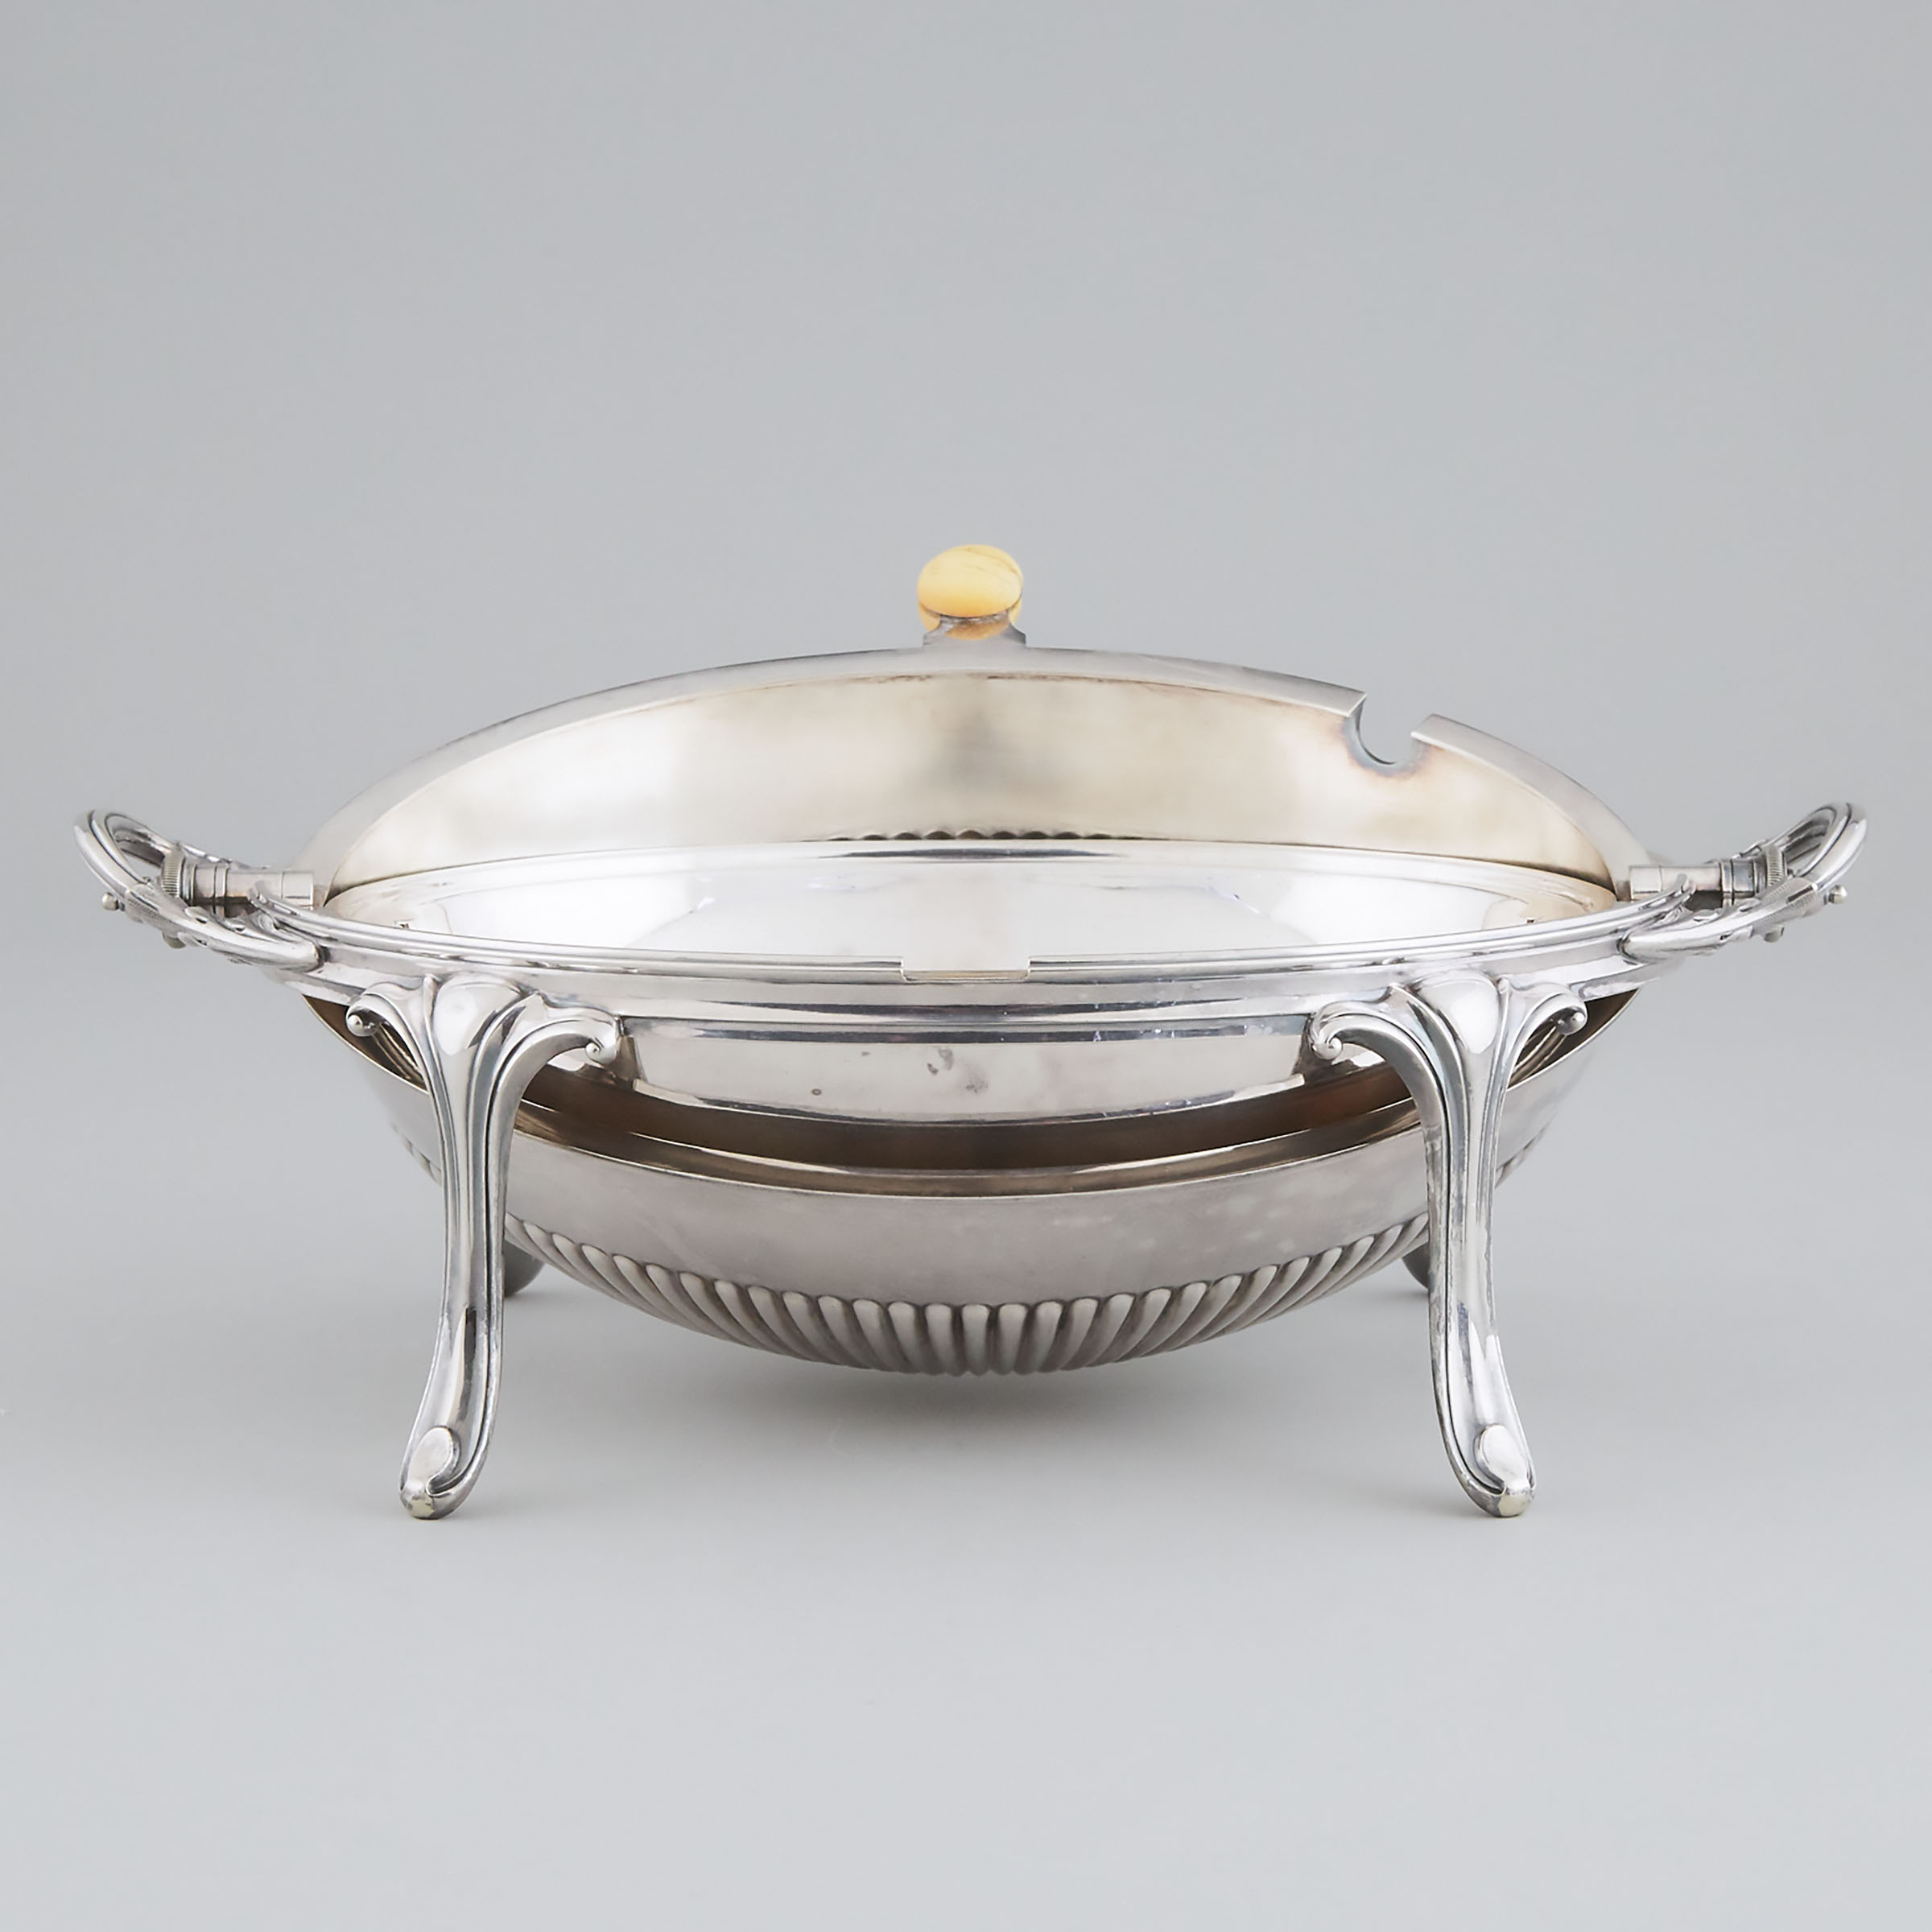 English Silver Plated Oval Breakfast Dish, James Dixon & Sons, early 20th century